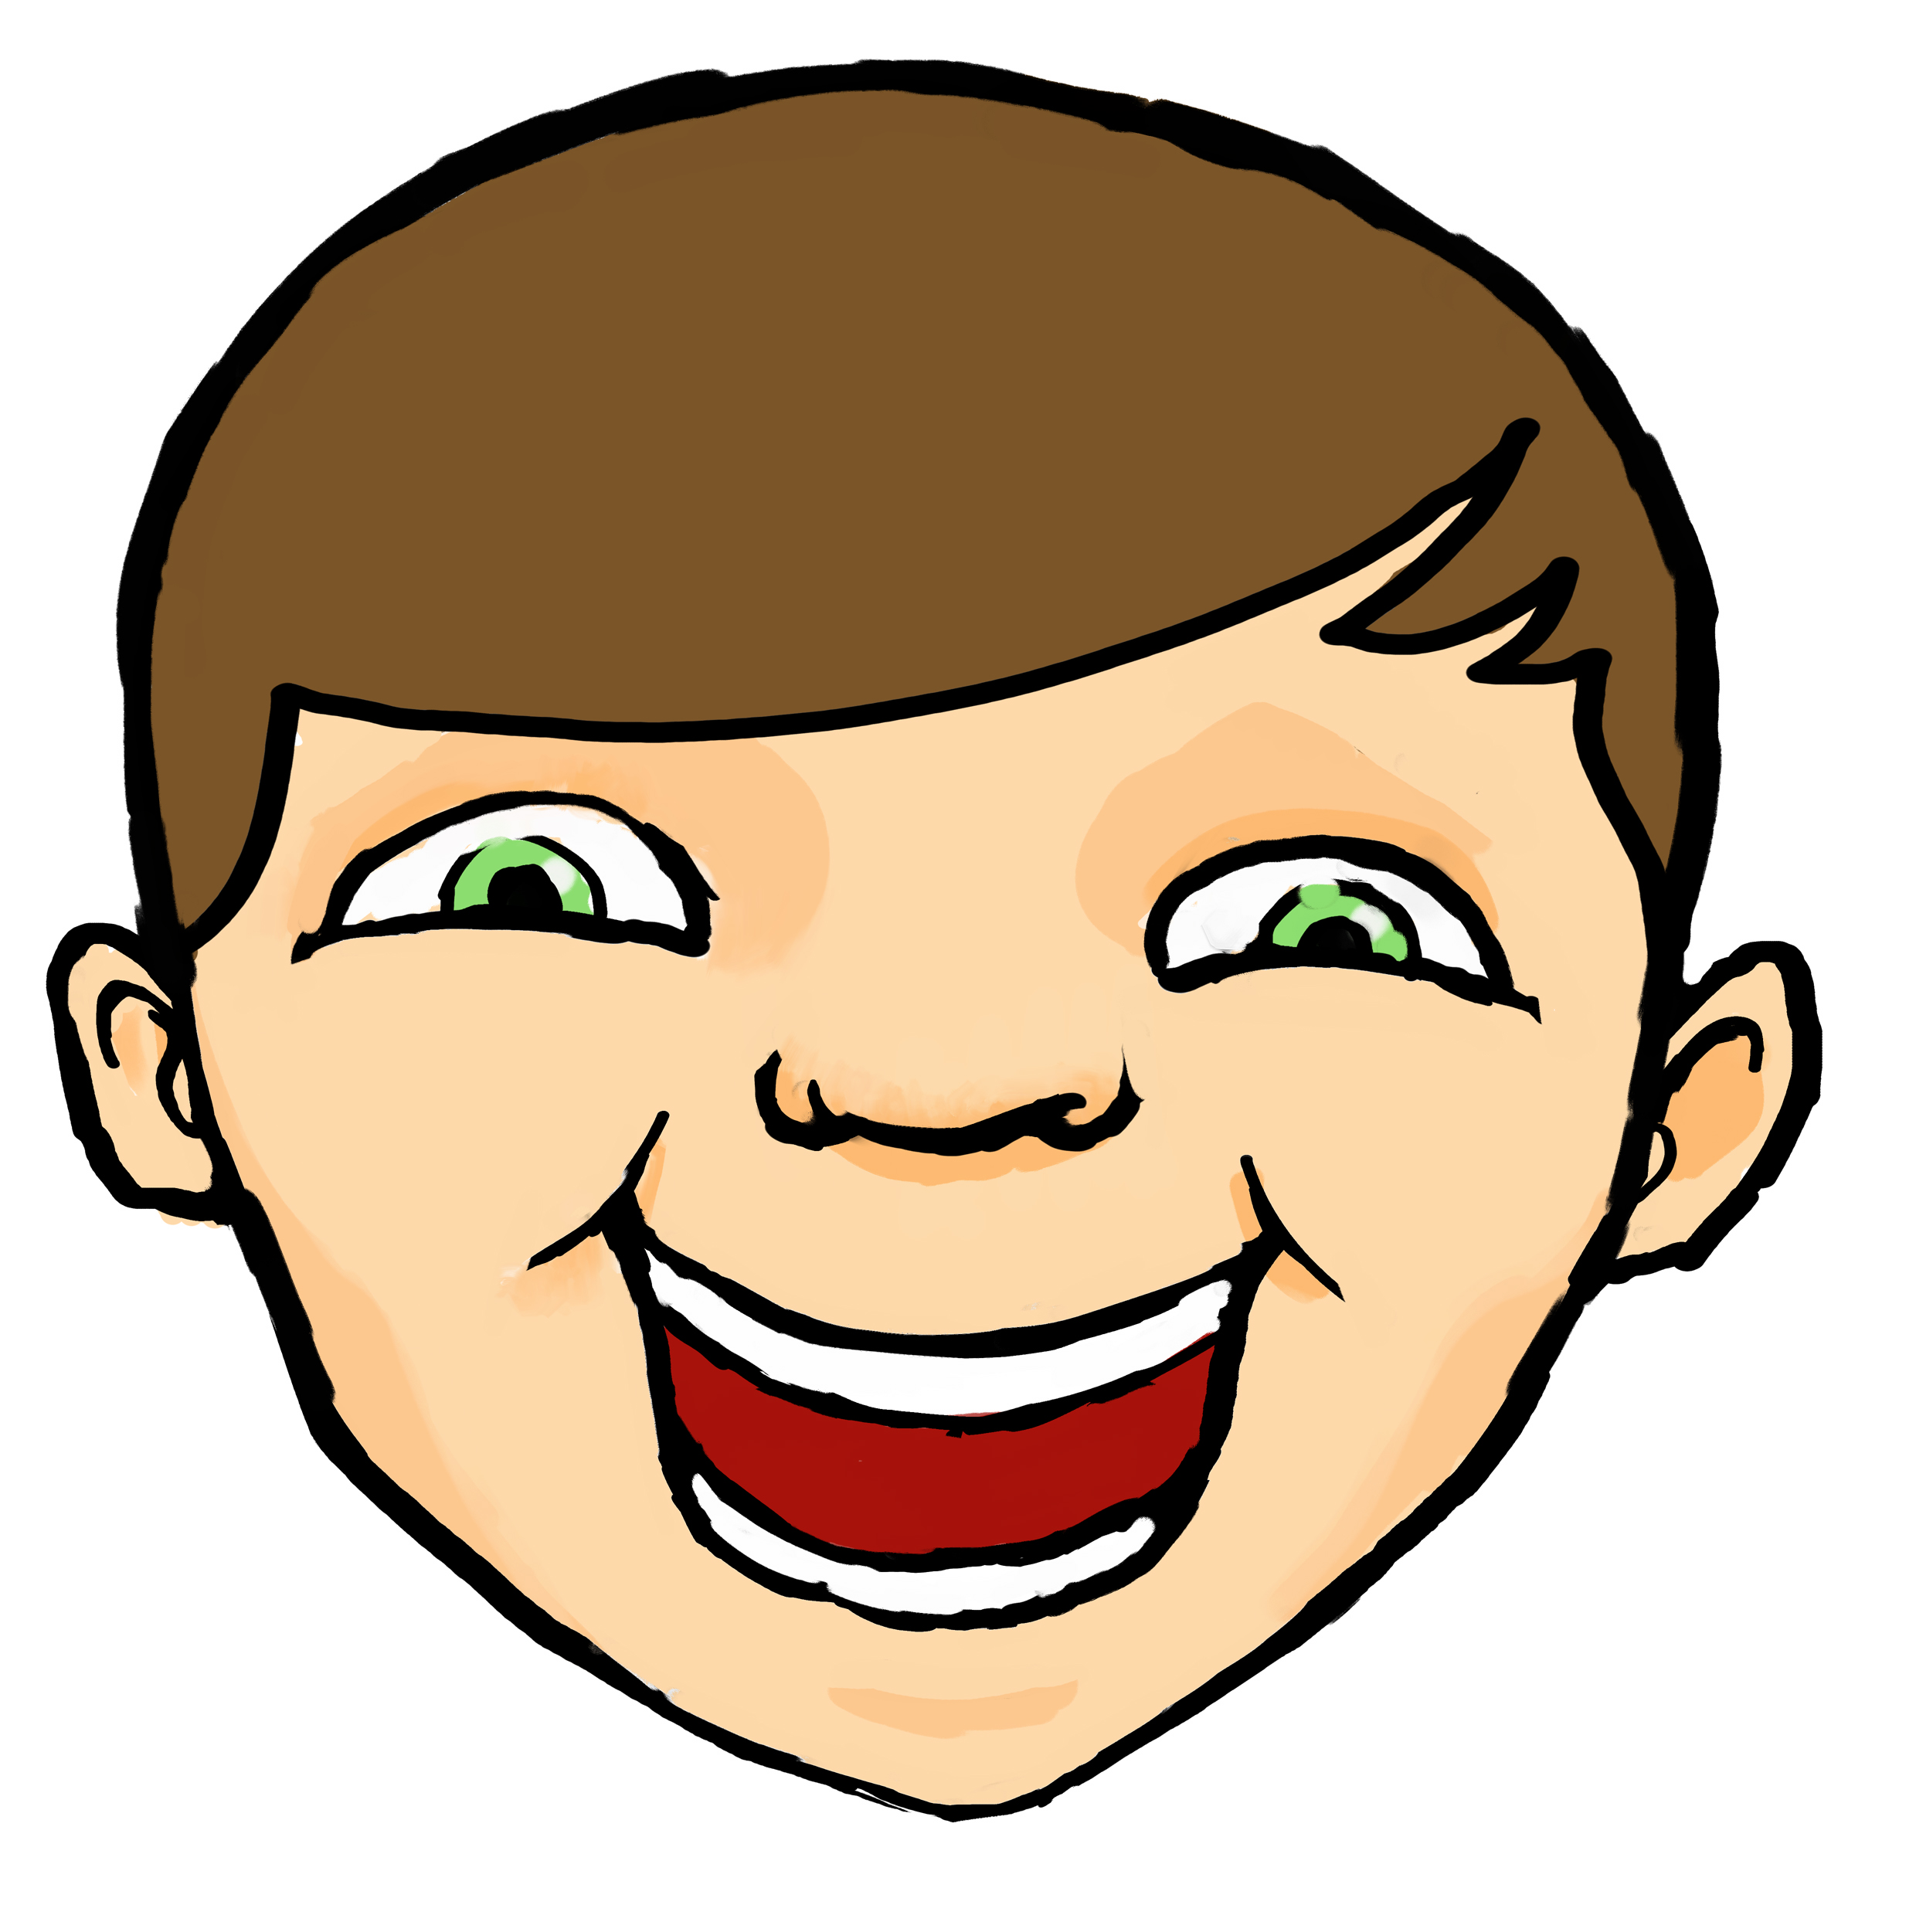 Smiley Laughing Wallpaper - ClipArt Best - ClipArt Best